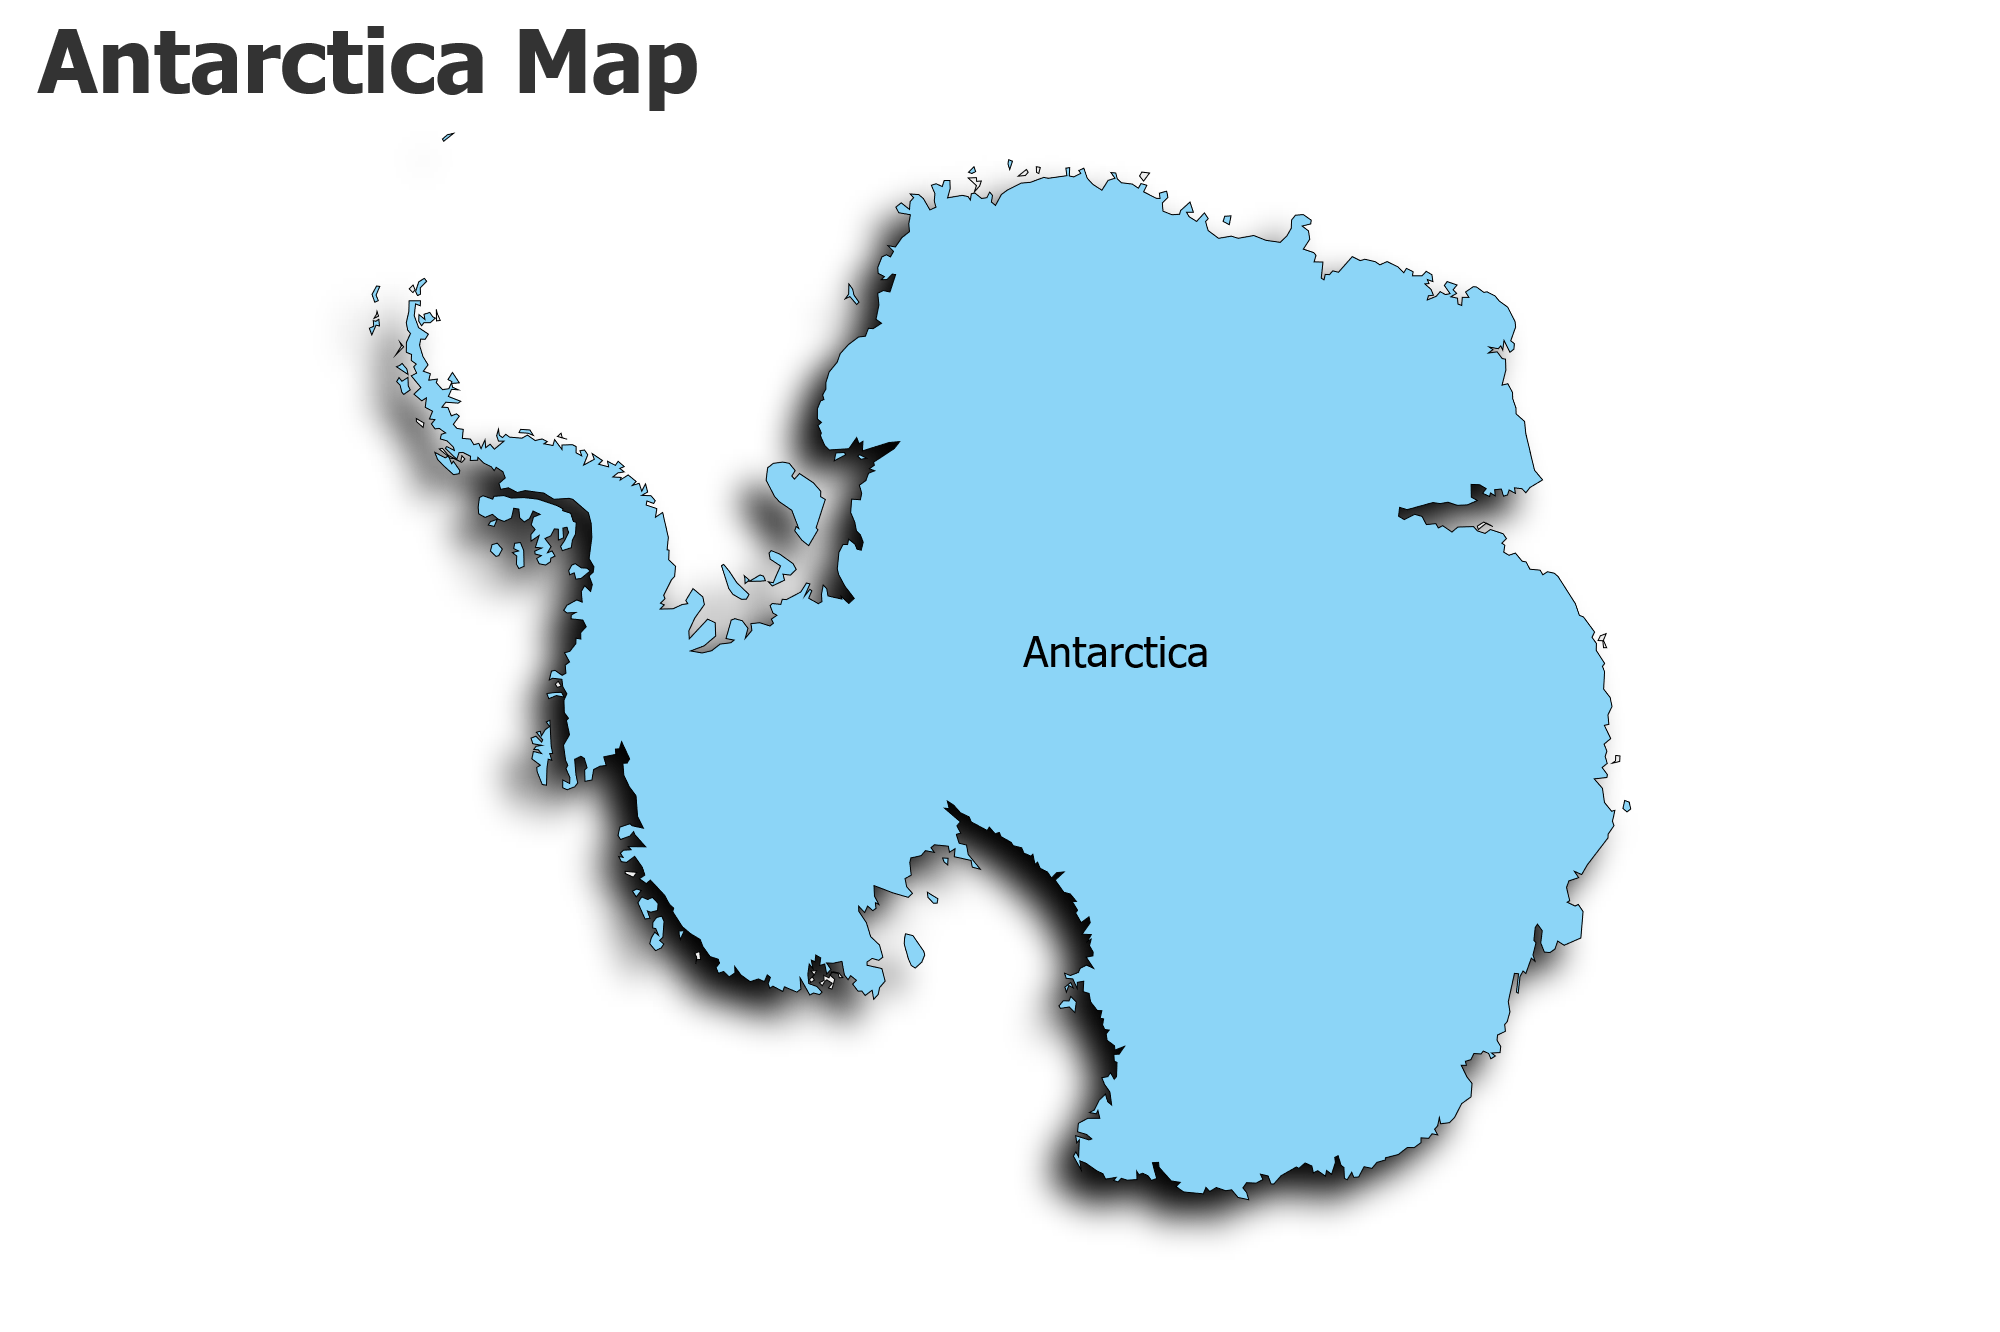 Introduction to Introduction to worlds fifth largest continent Antarctica